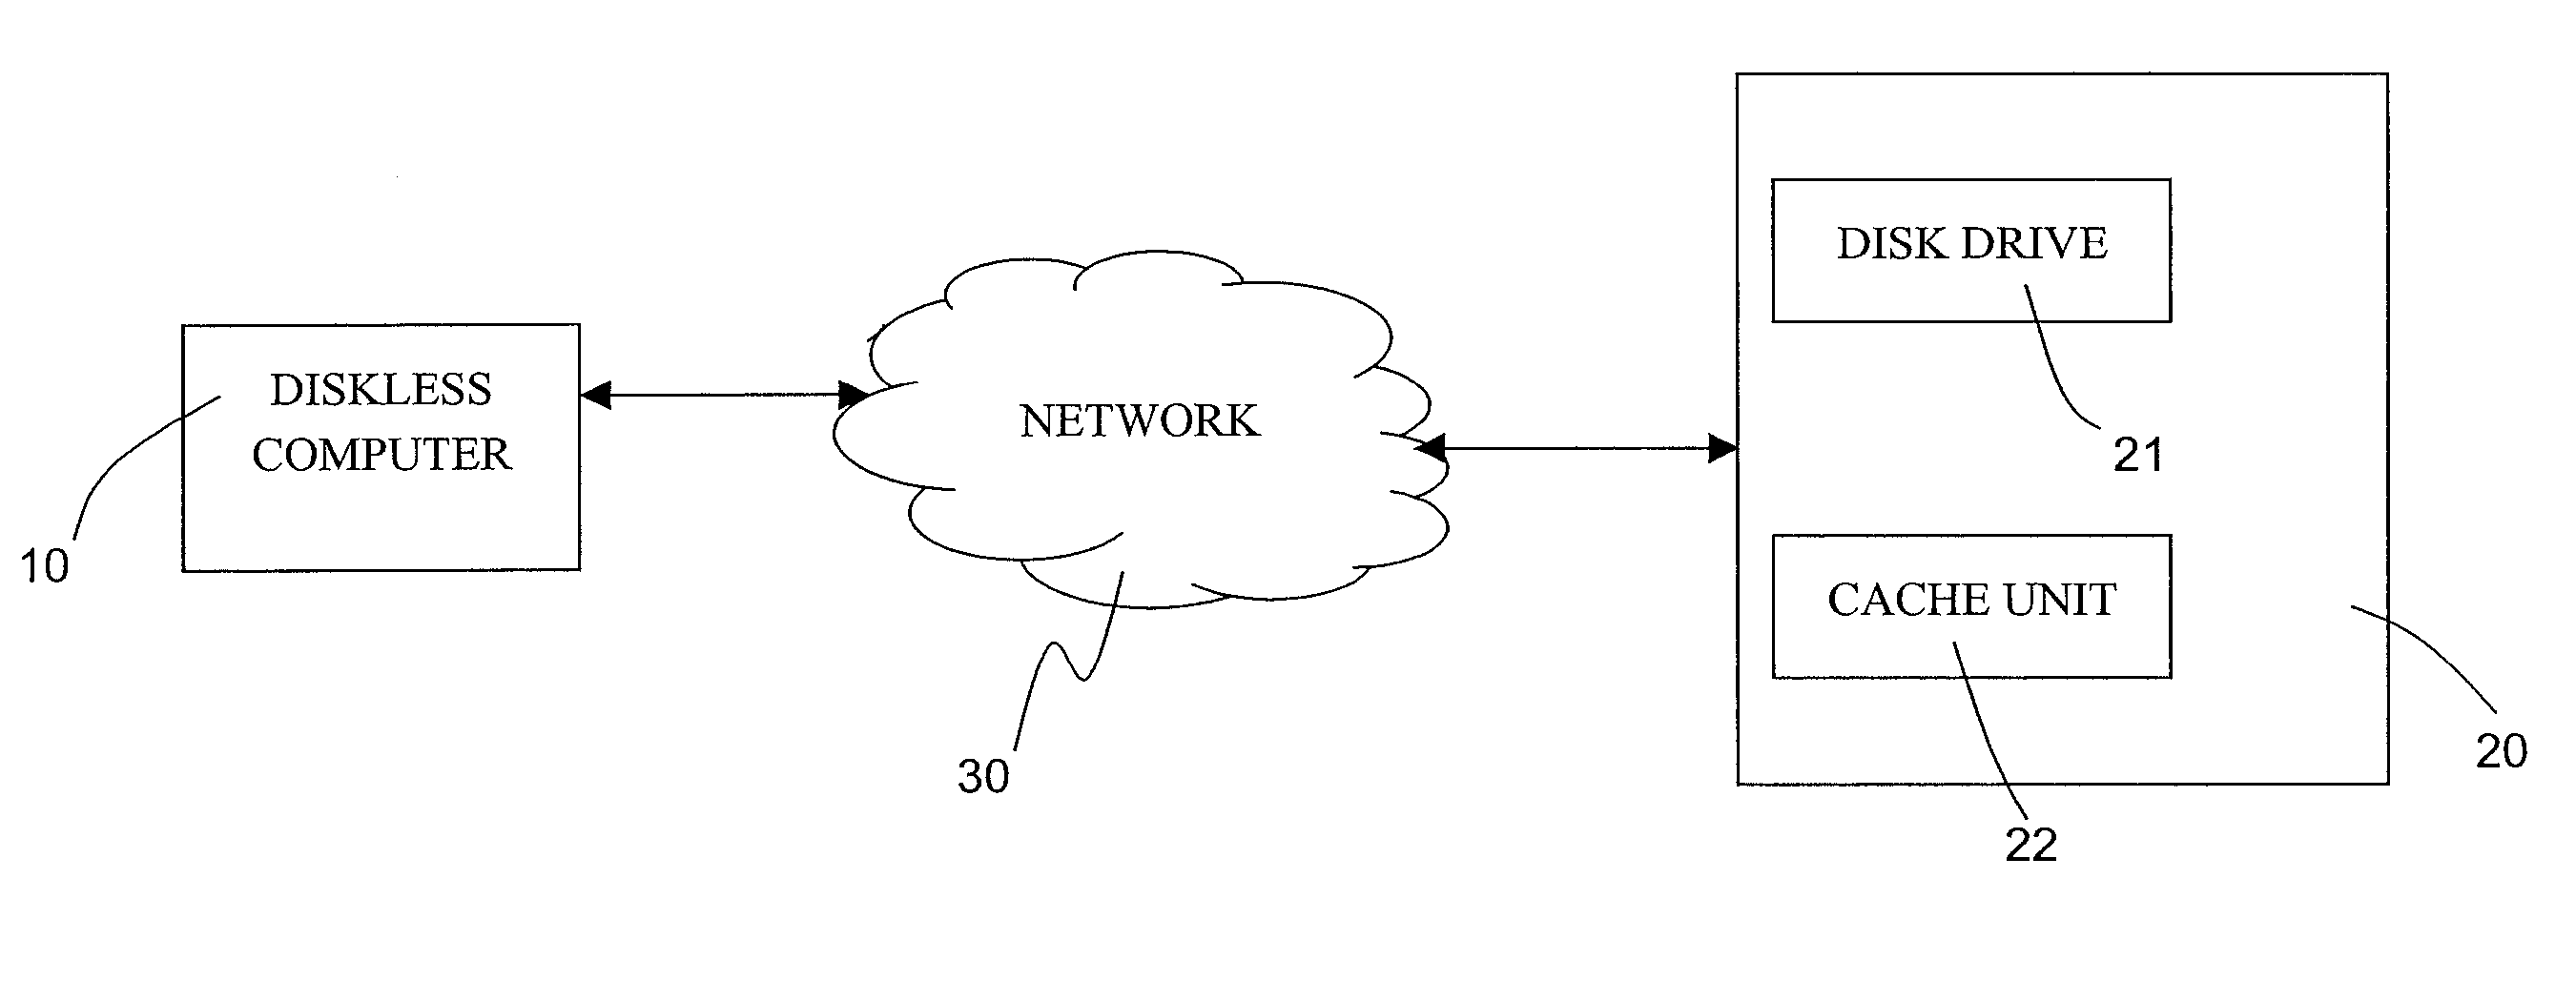 Method for improving data reading speed of a diskless computer